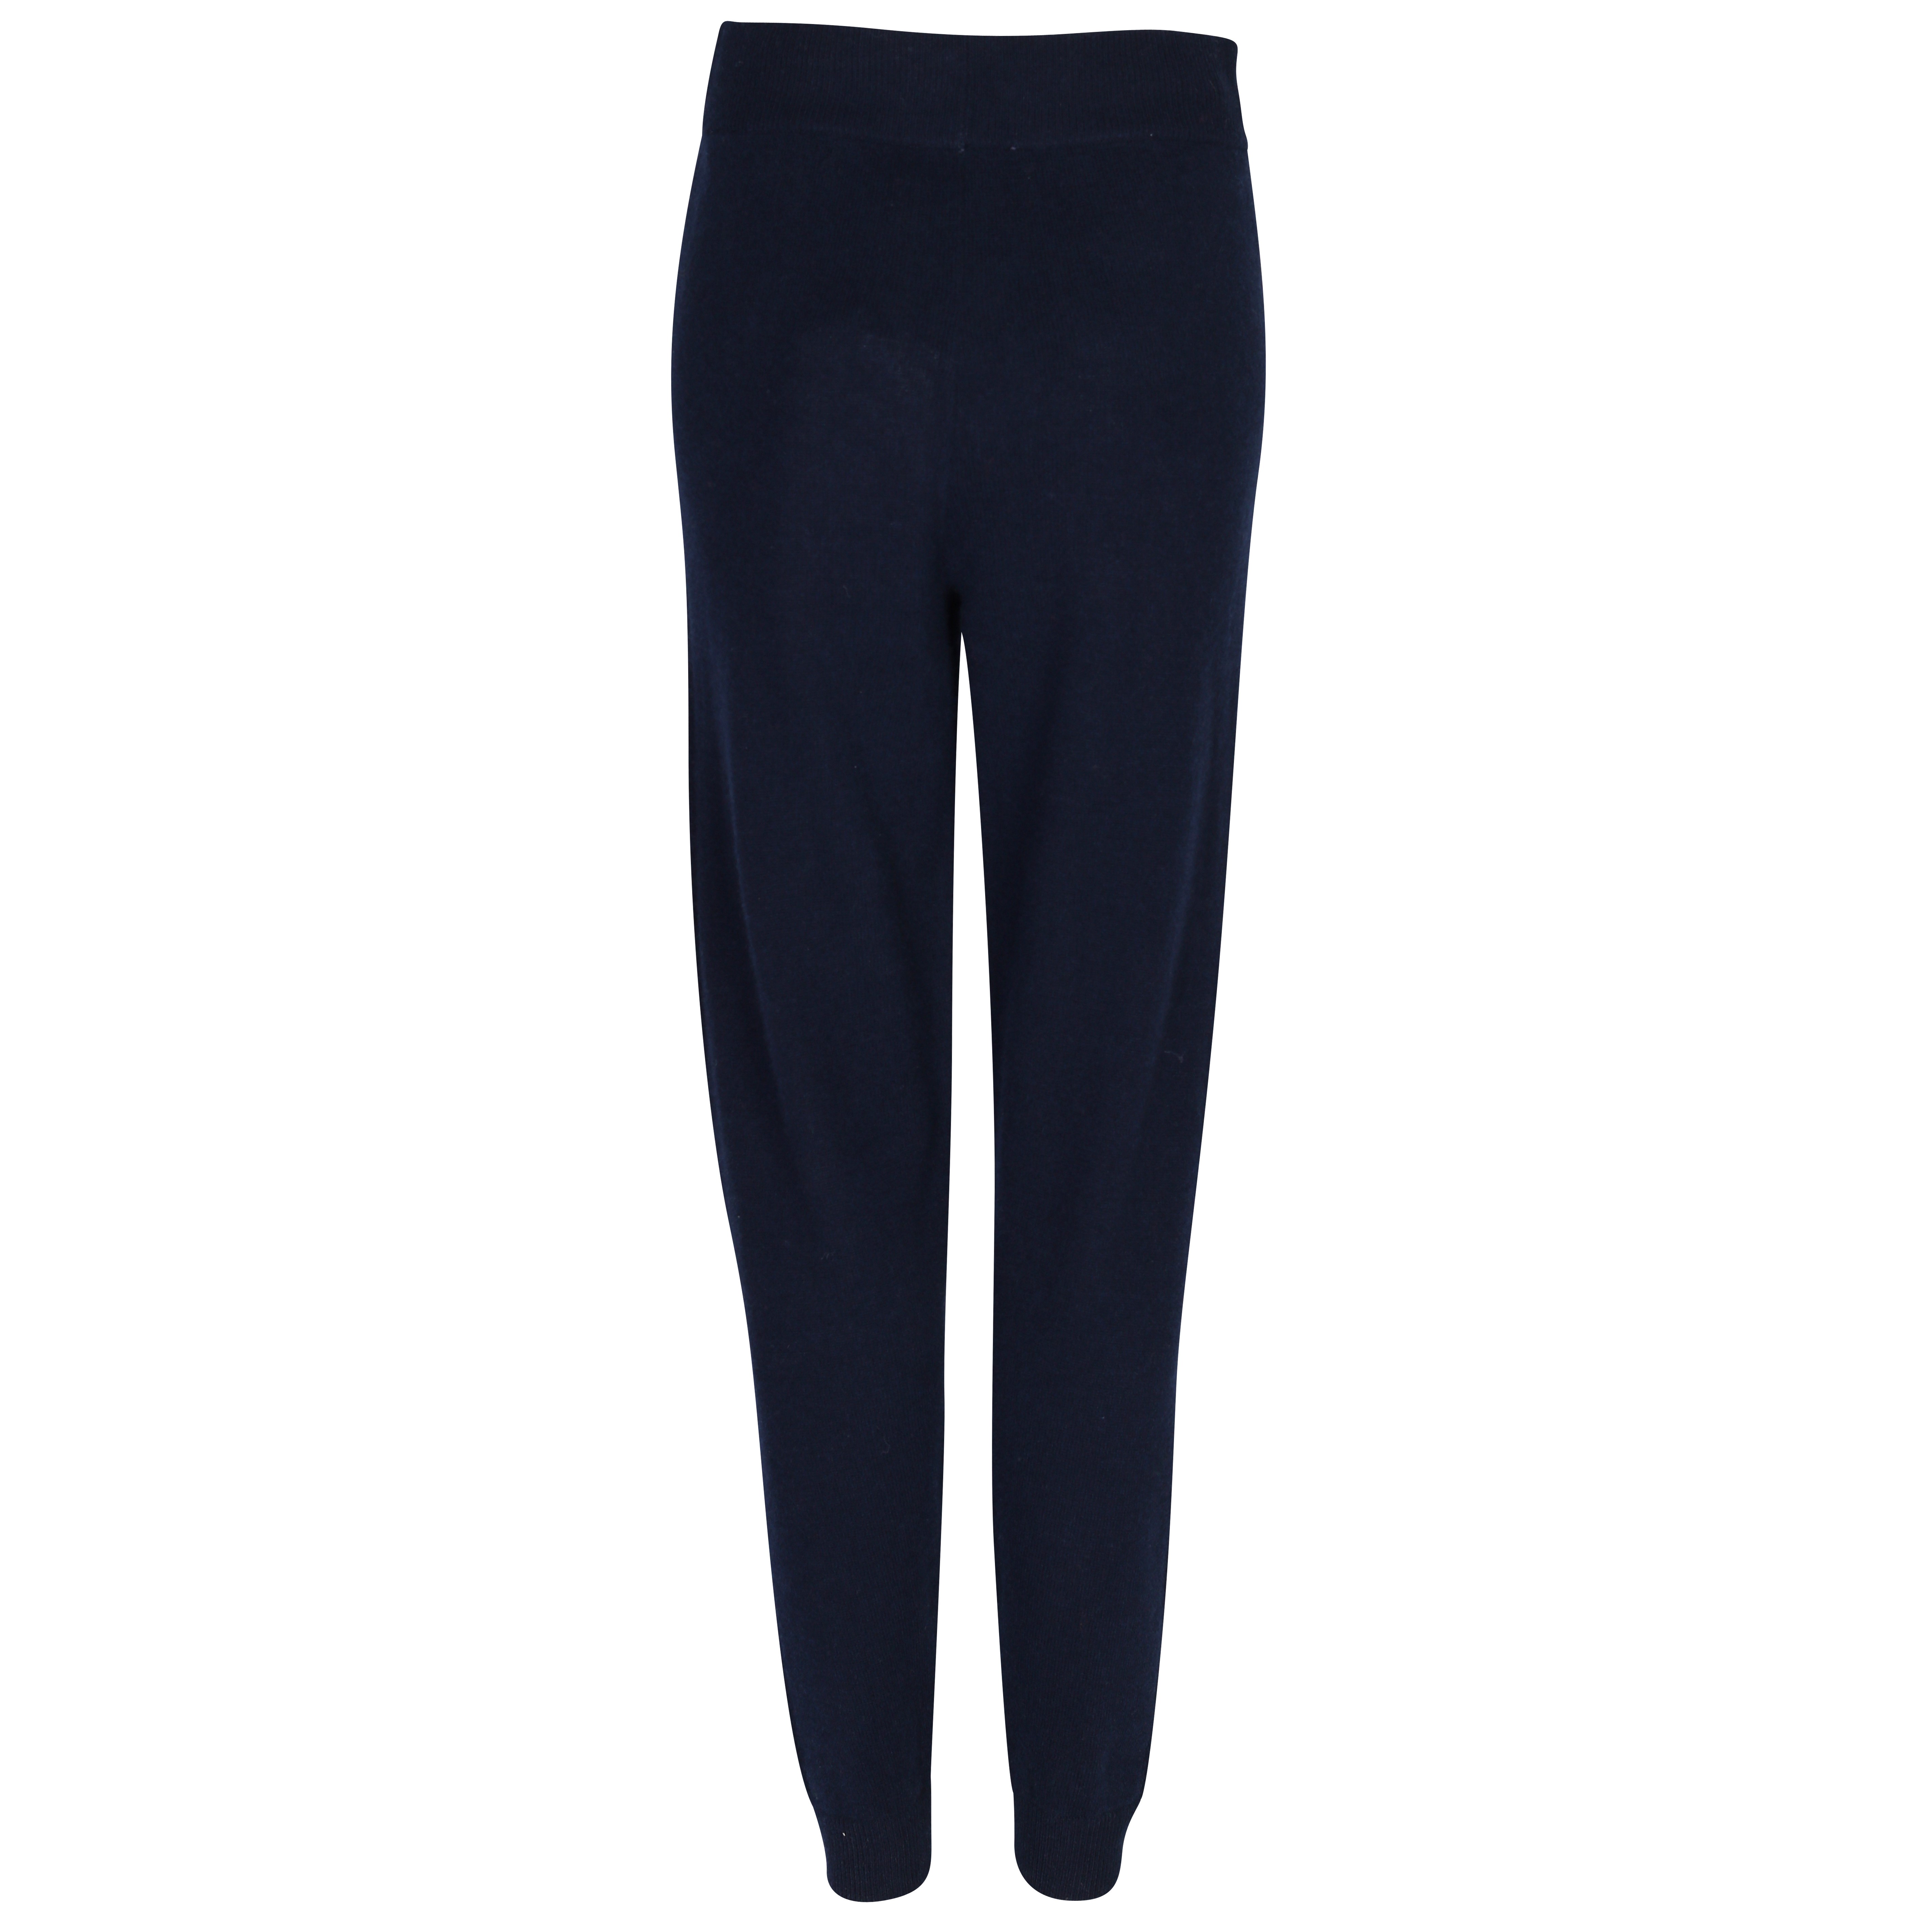 Absolut Cashmere Oliane Jogging Pant in Nuit XS